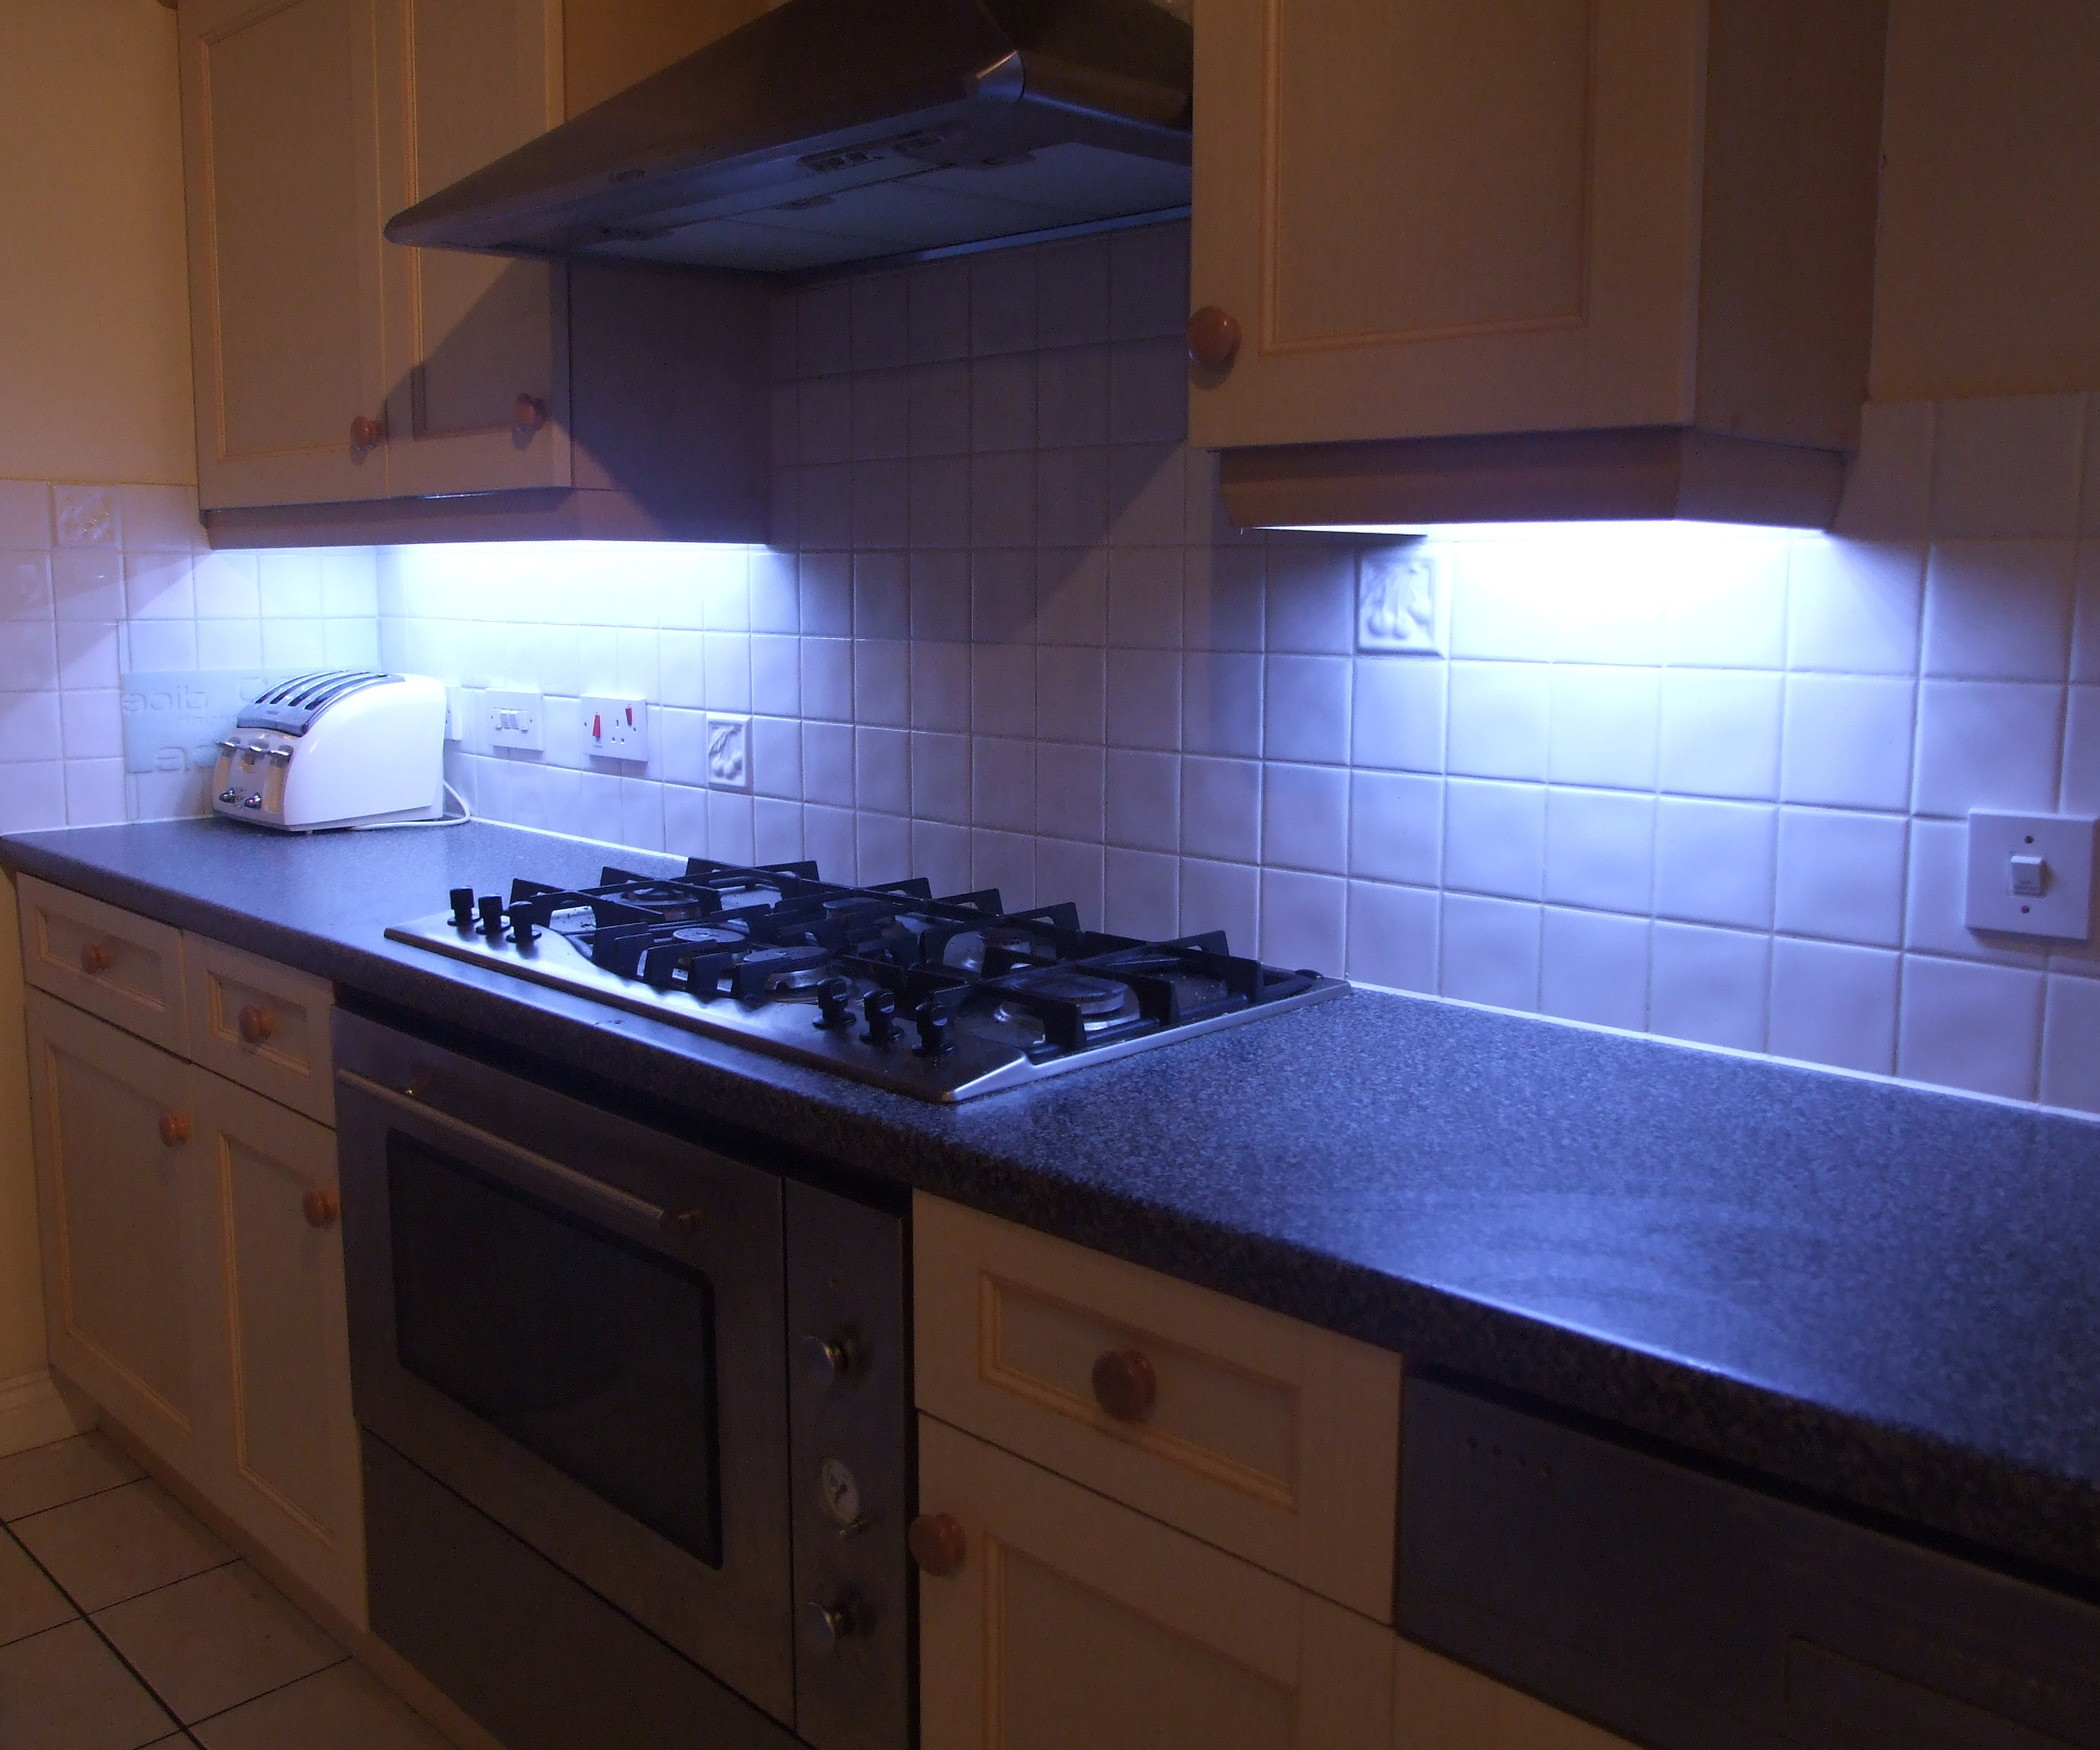 Led Light Kitchen
 How to Fit LED Kitchen Lights With Fade Effect 7 Steps